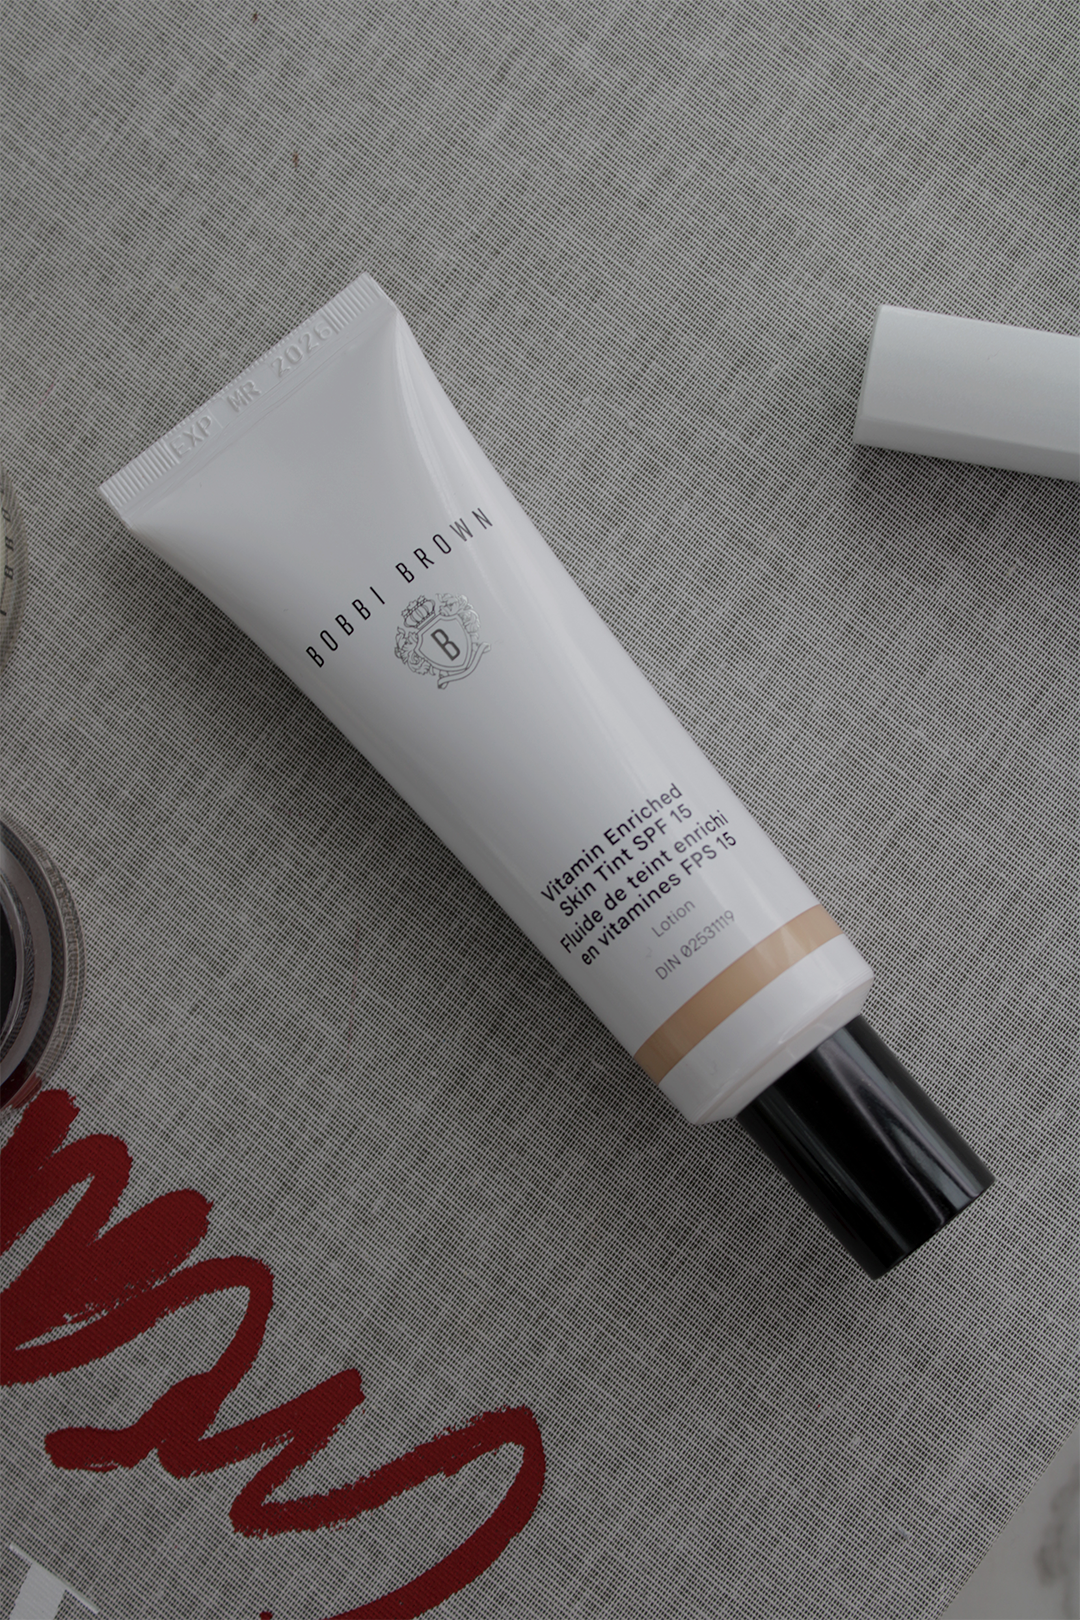 Bobbi Brown | Vitamin Enriched Hydrating Skin Tint SPF 15 with Hyaluronic Acid + Dual-Ended Cream Eyeshadow Stick